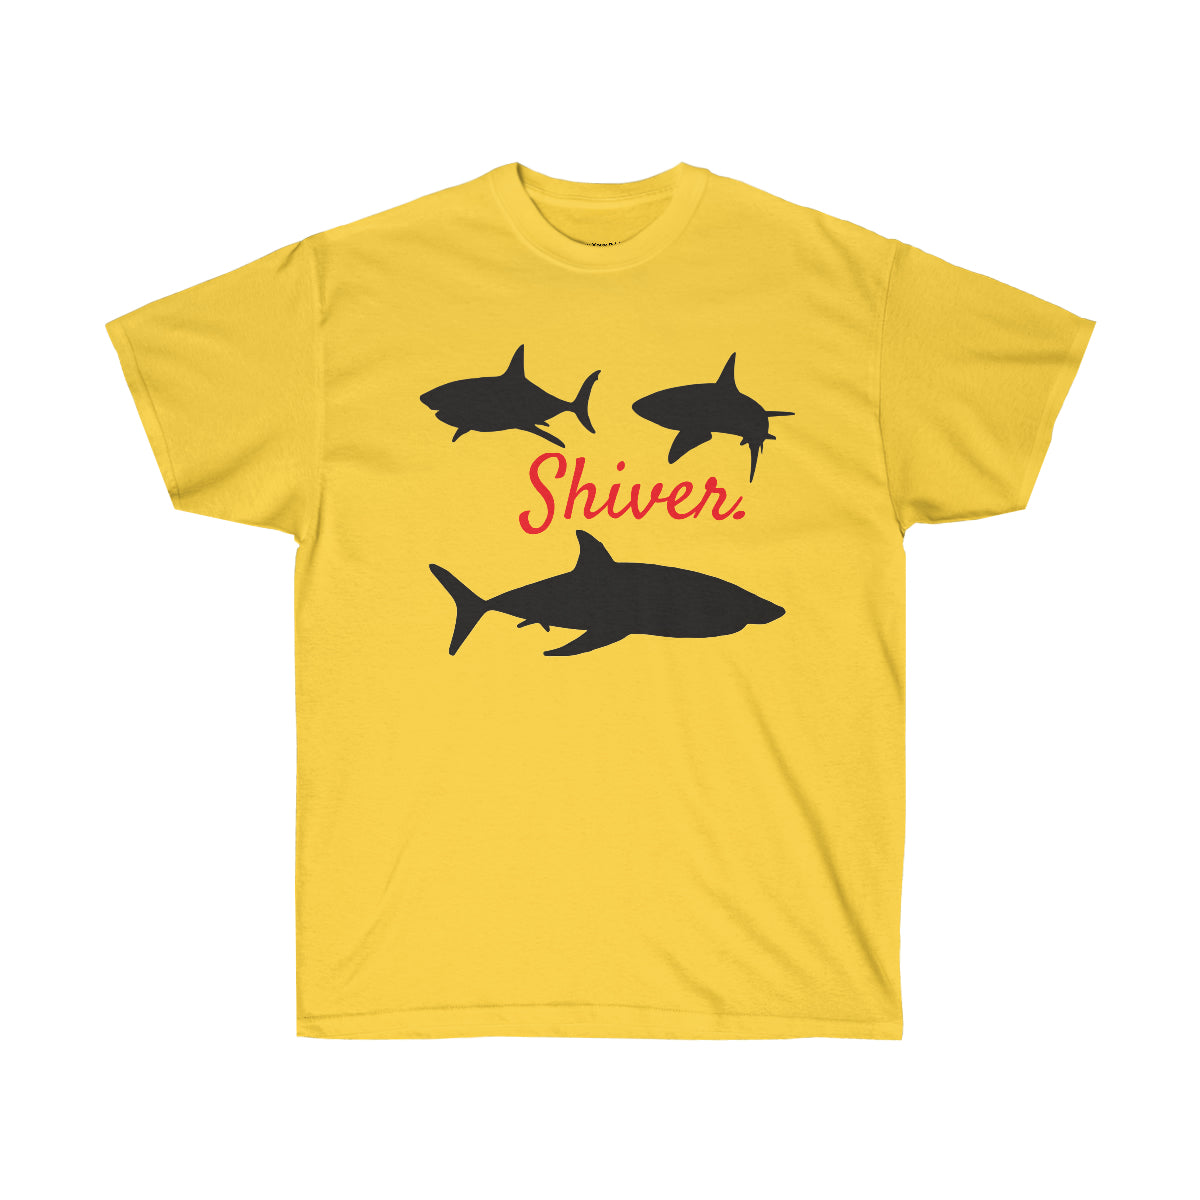 Shiver of Sharks Aquarium of the Pacific T-shirt